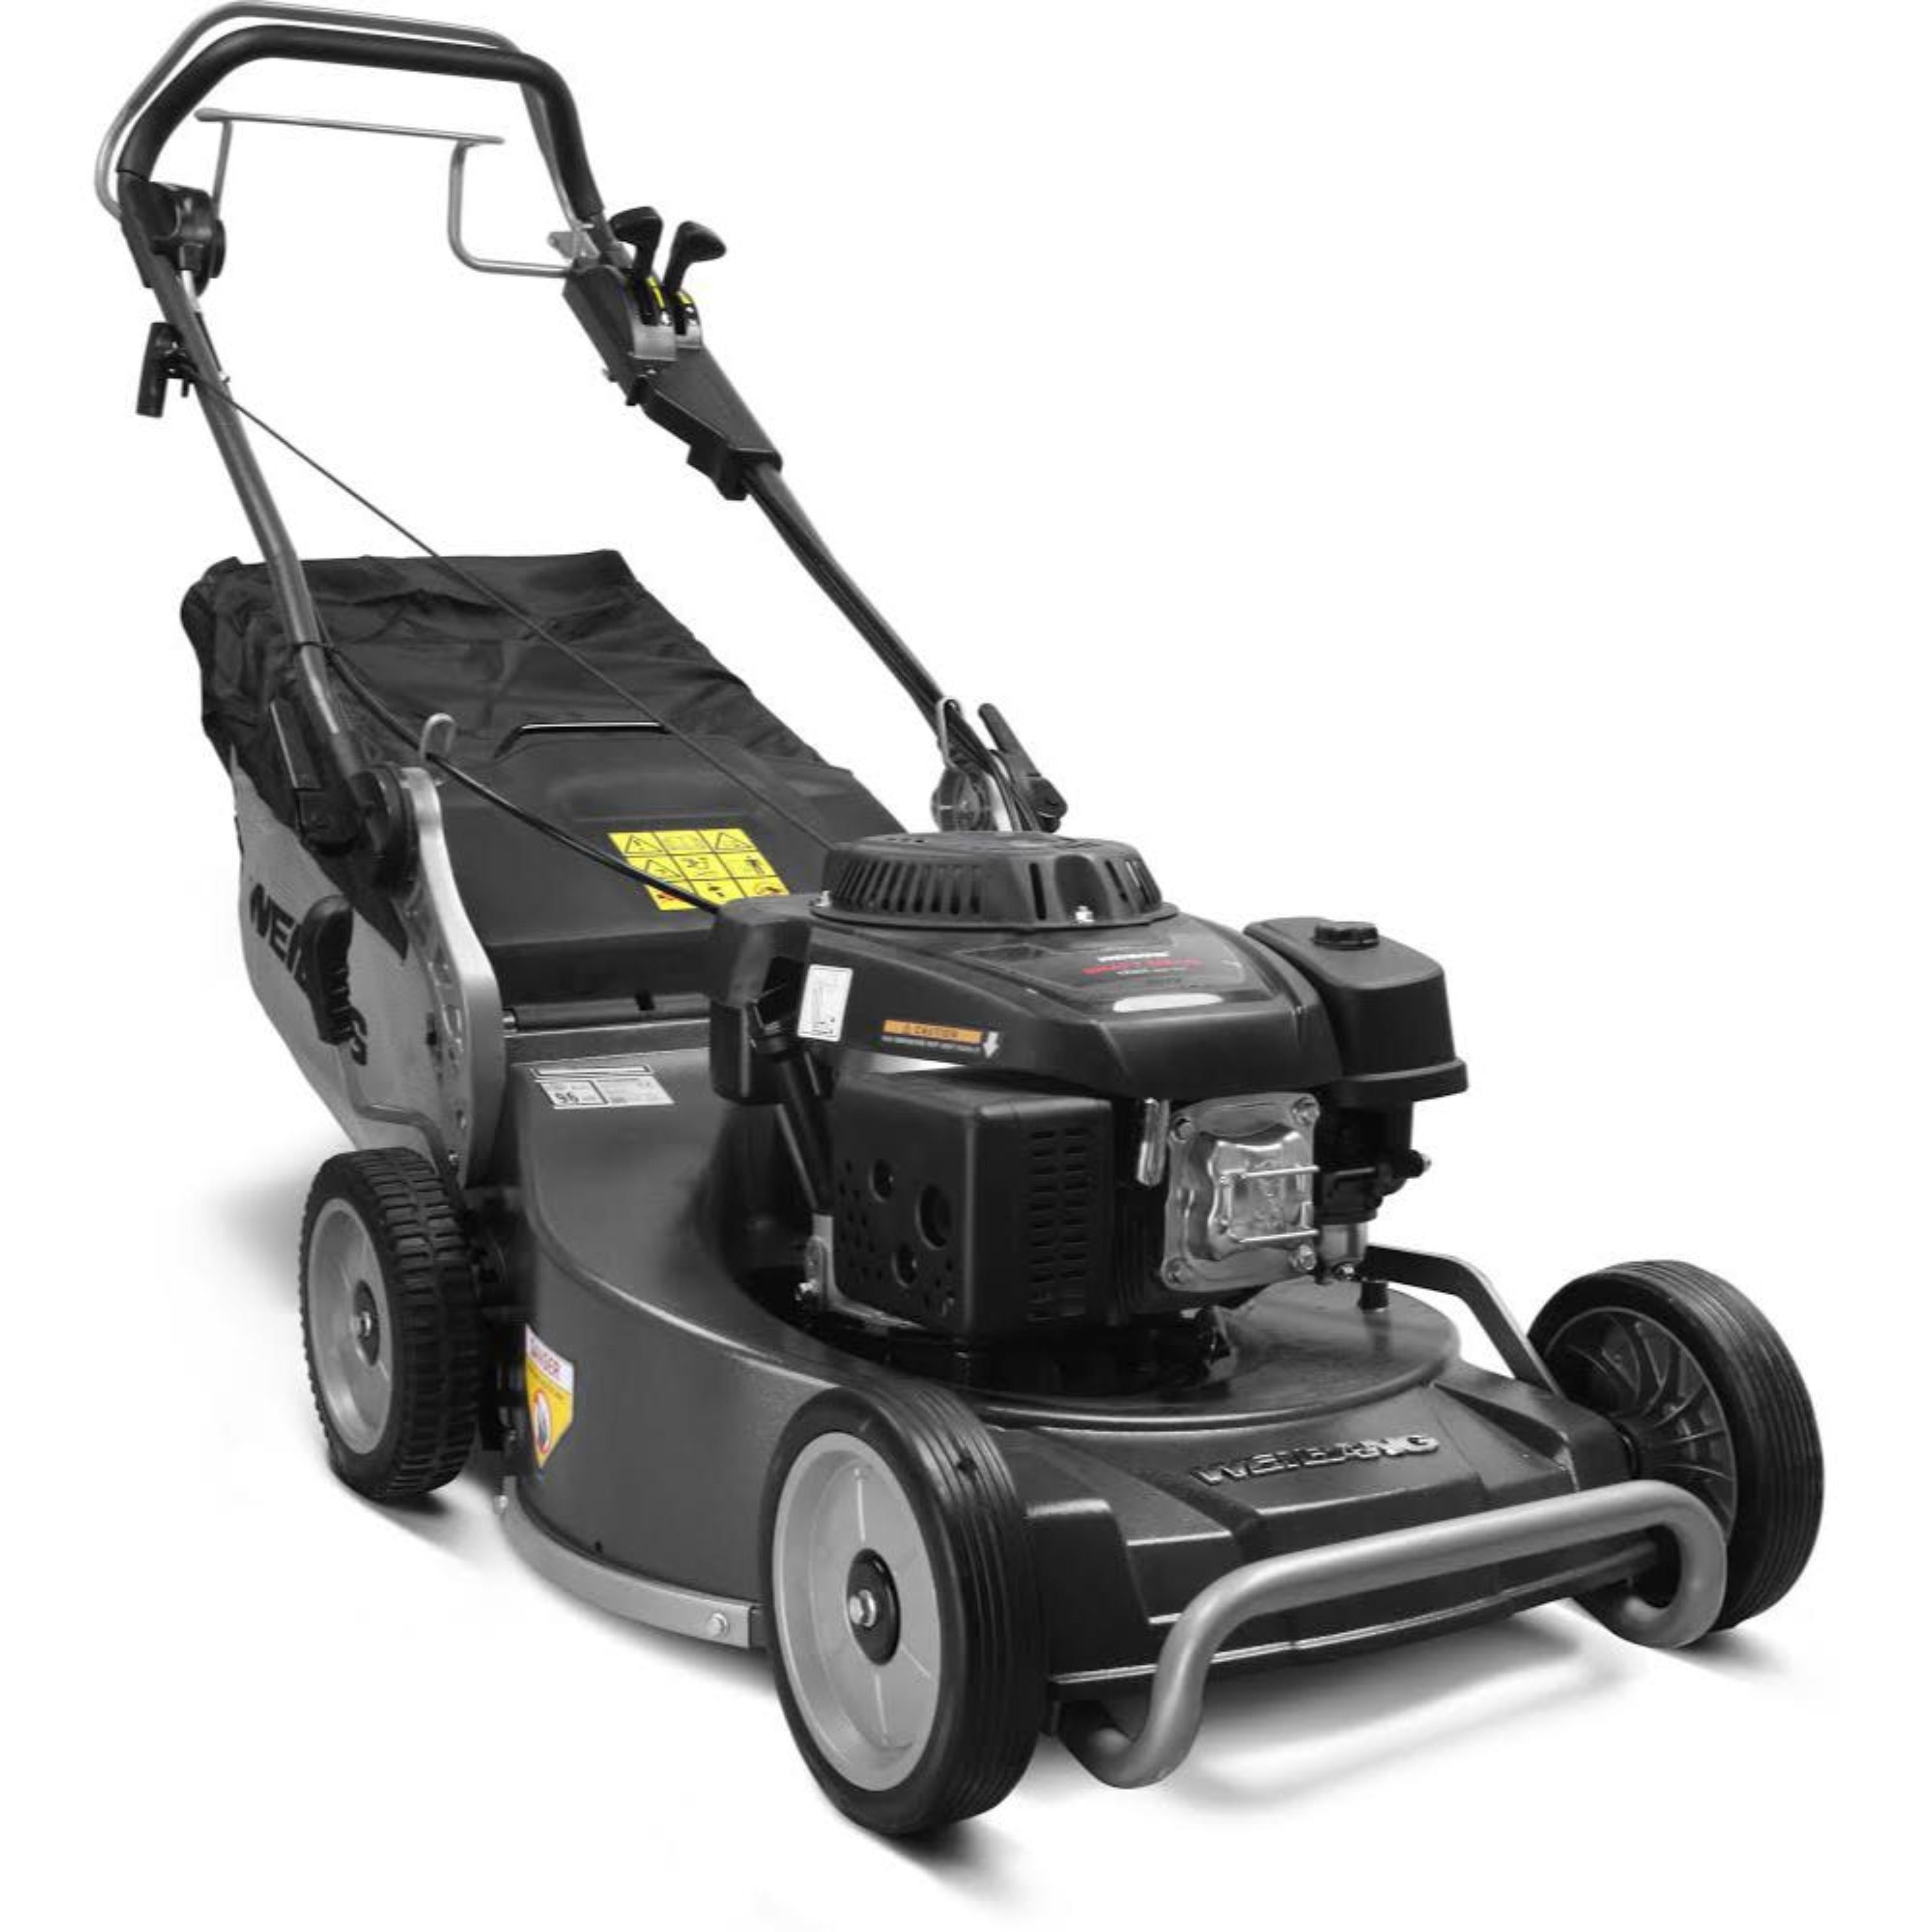 The Weibang SD-PRO is a shaft driven commercial 21” mower. With our class leading 196cc engine and shaft drive technology this mower is extremely strong and durable.